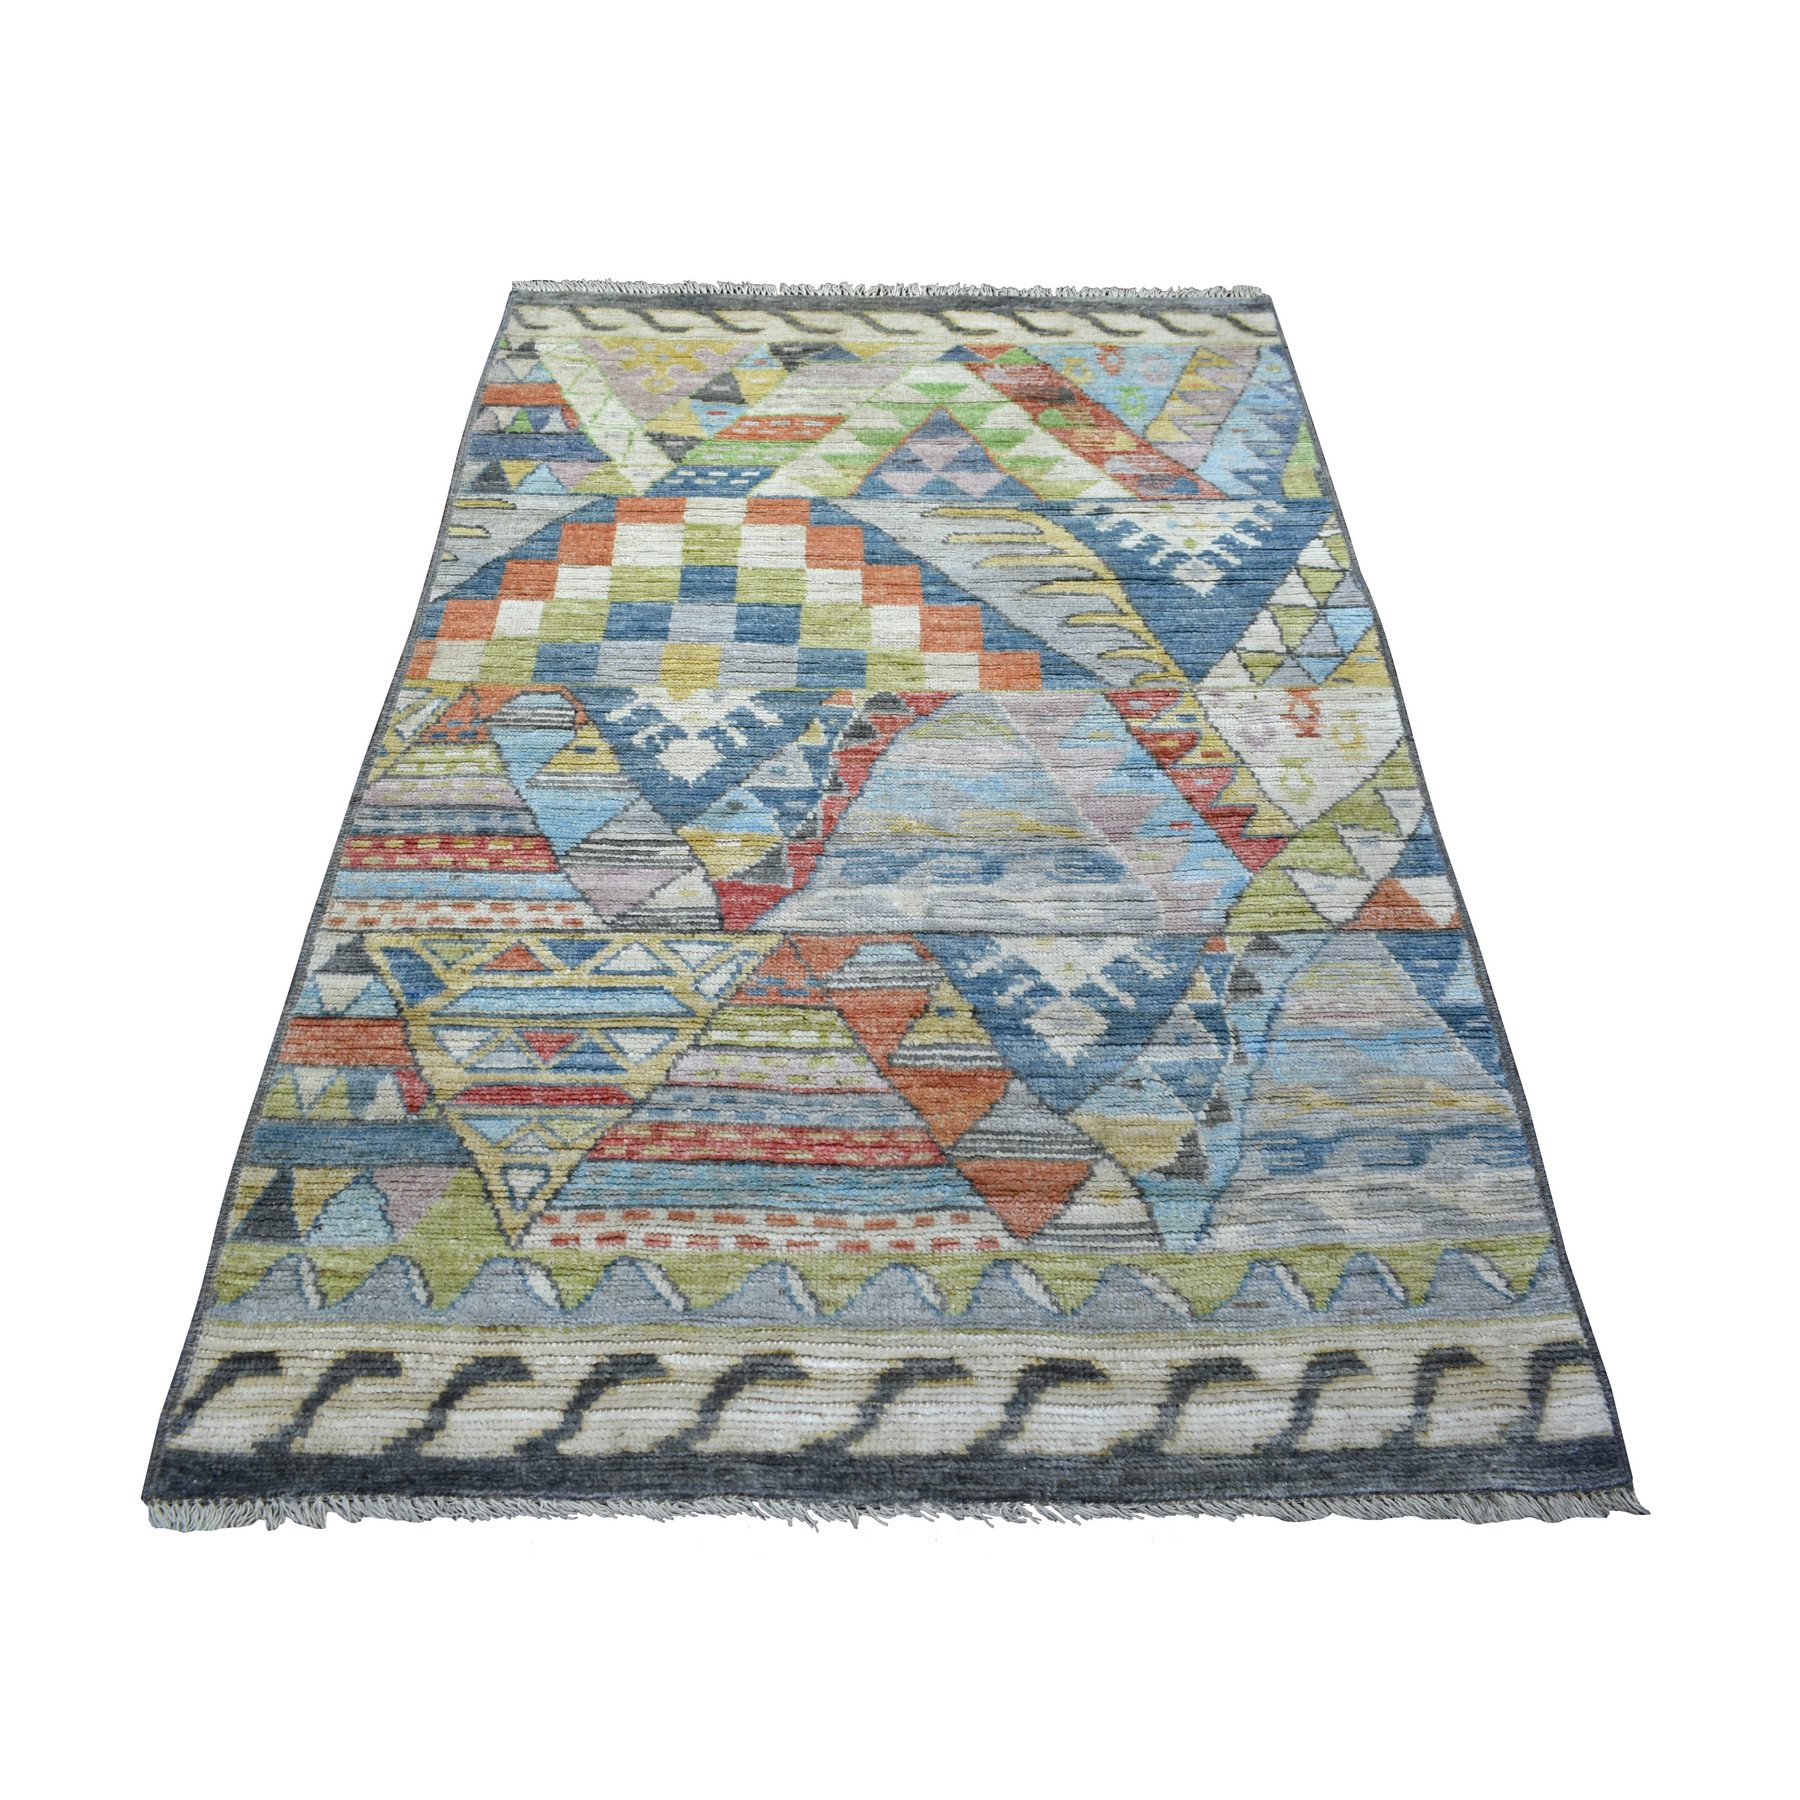 4'x6'2" Colorful, Pure Wool Hand Woven, Anatolian Village Inspired Patchwork Design Natural Dyes, Oriental Rug 